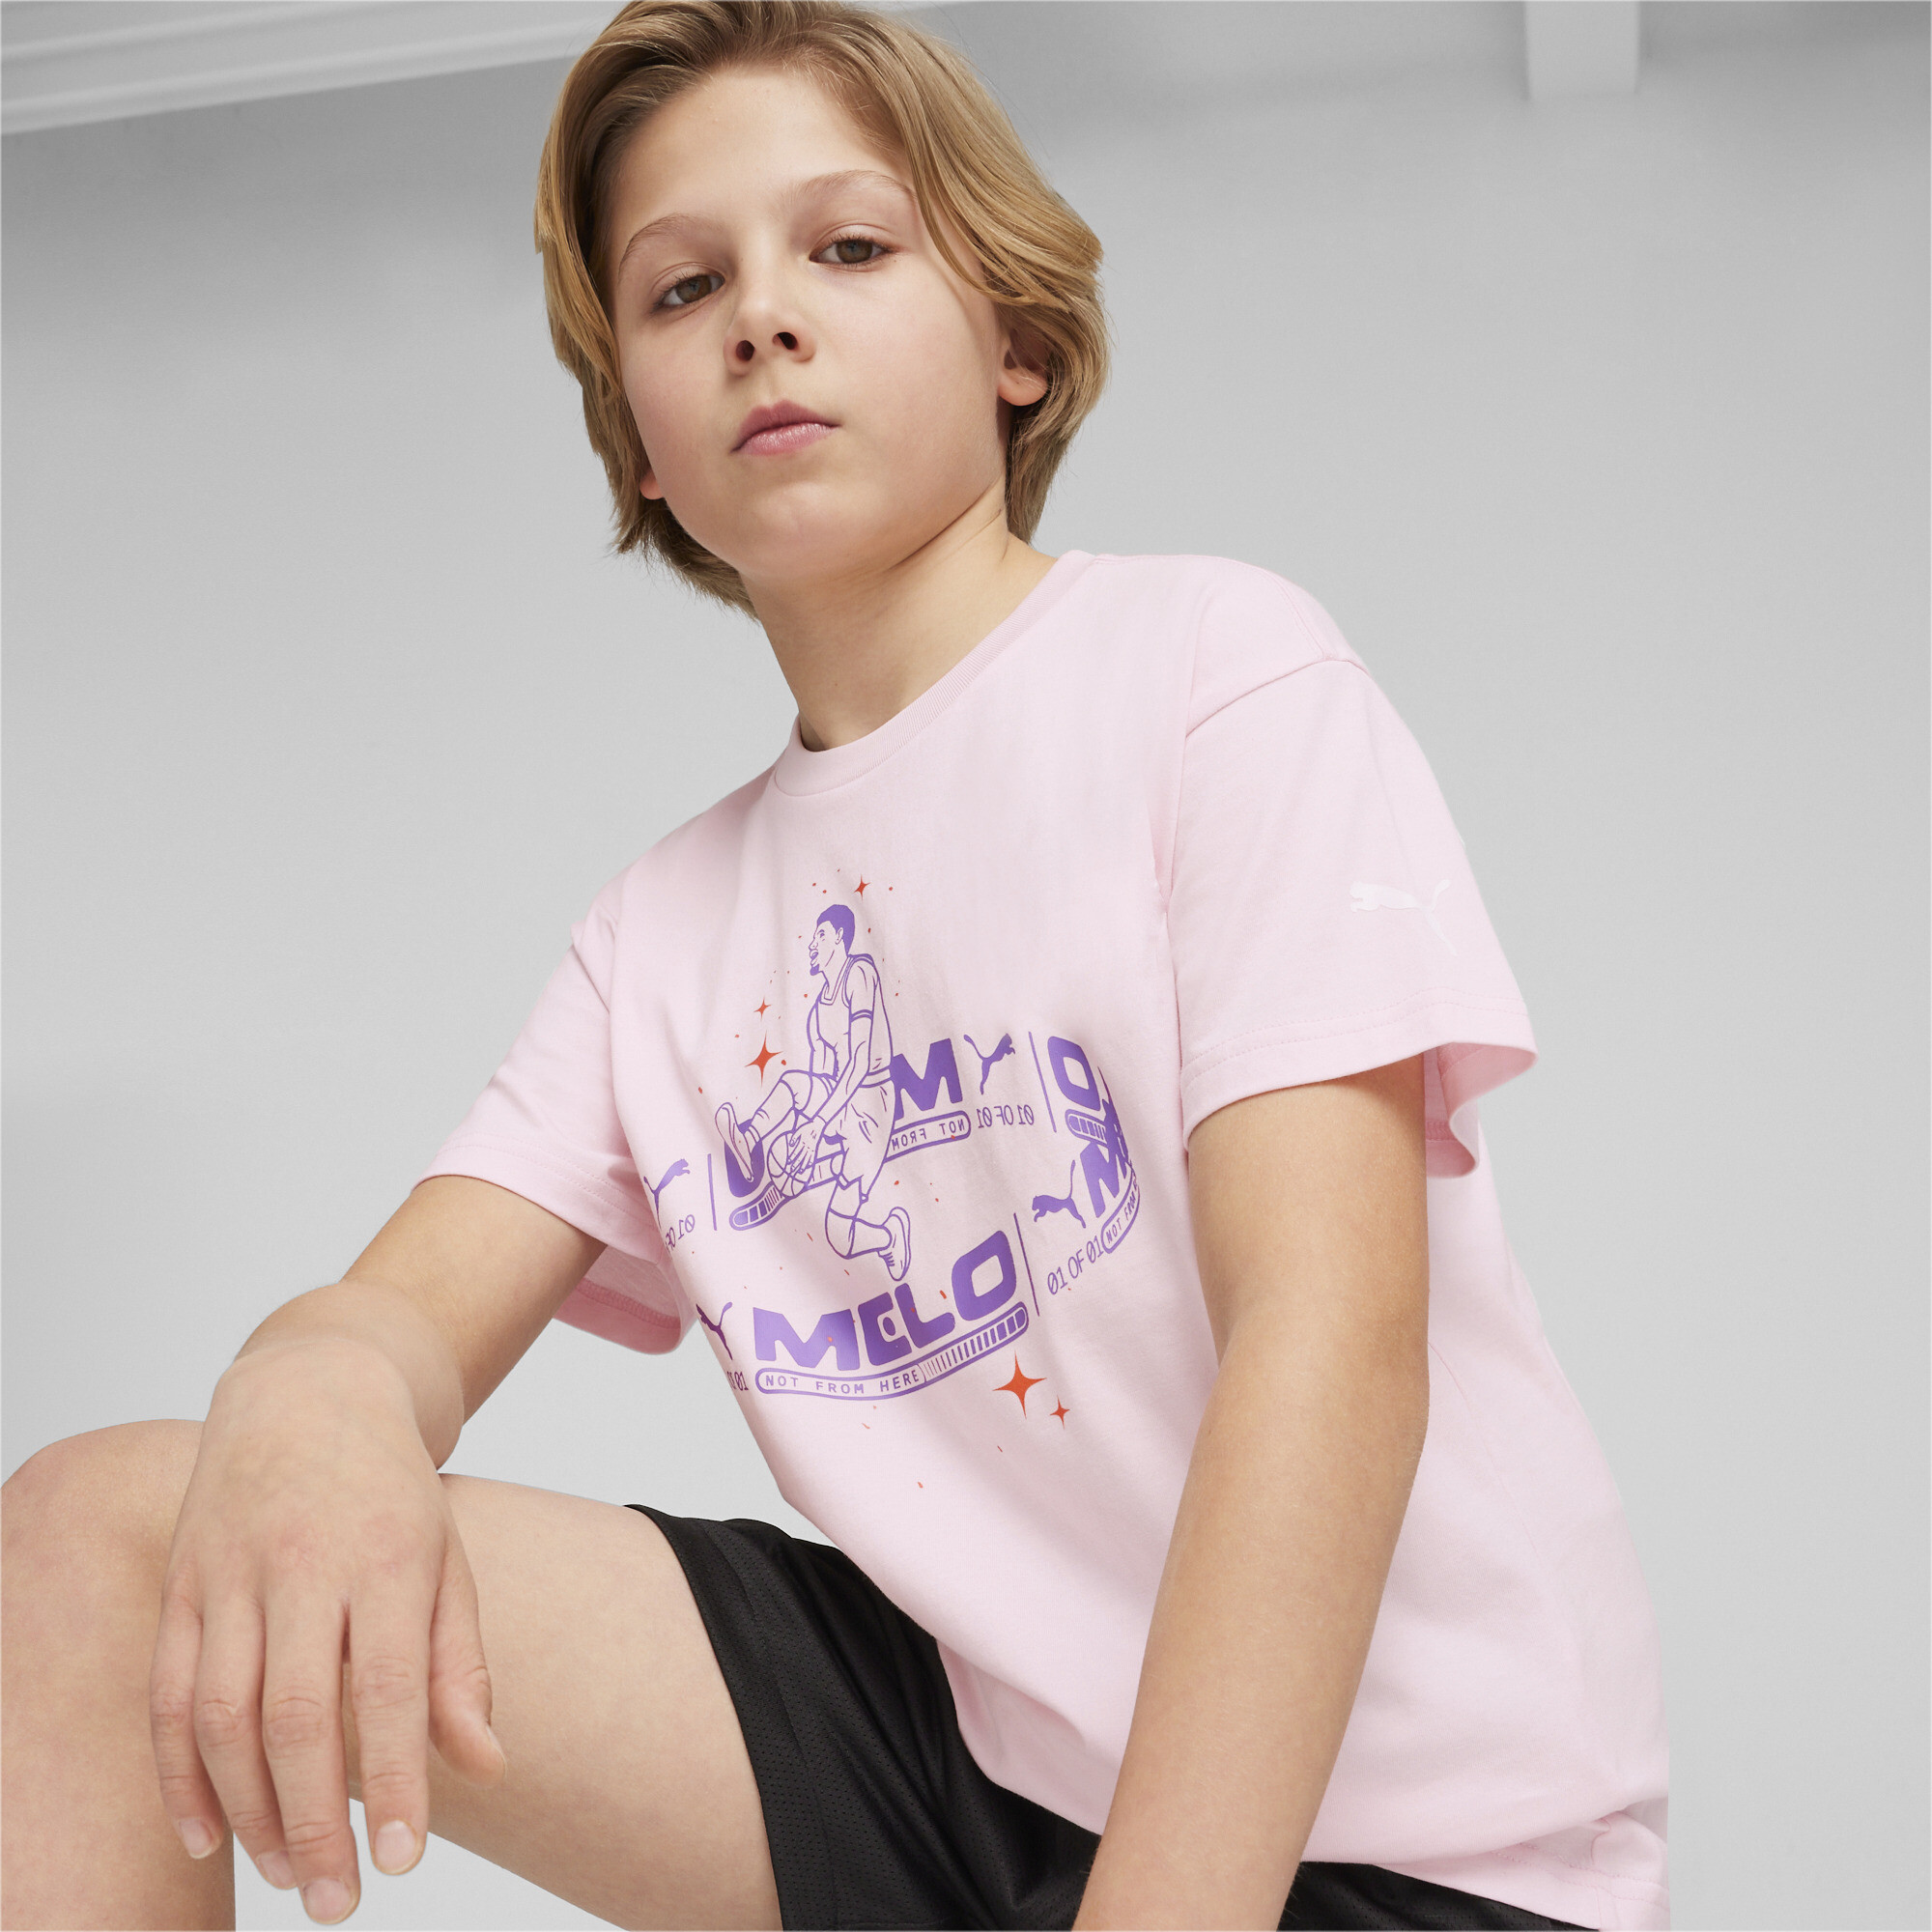 Puma MELO IRIDESCENT Boys' T-Shirt, Pink, Size 9-10Y, Age